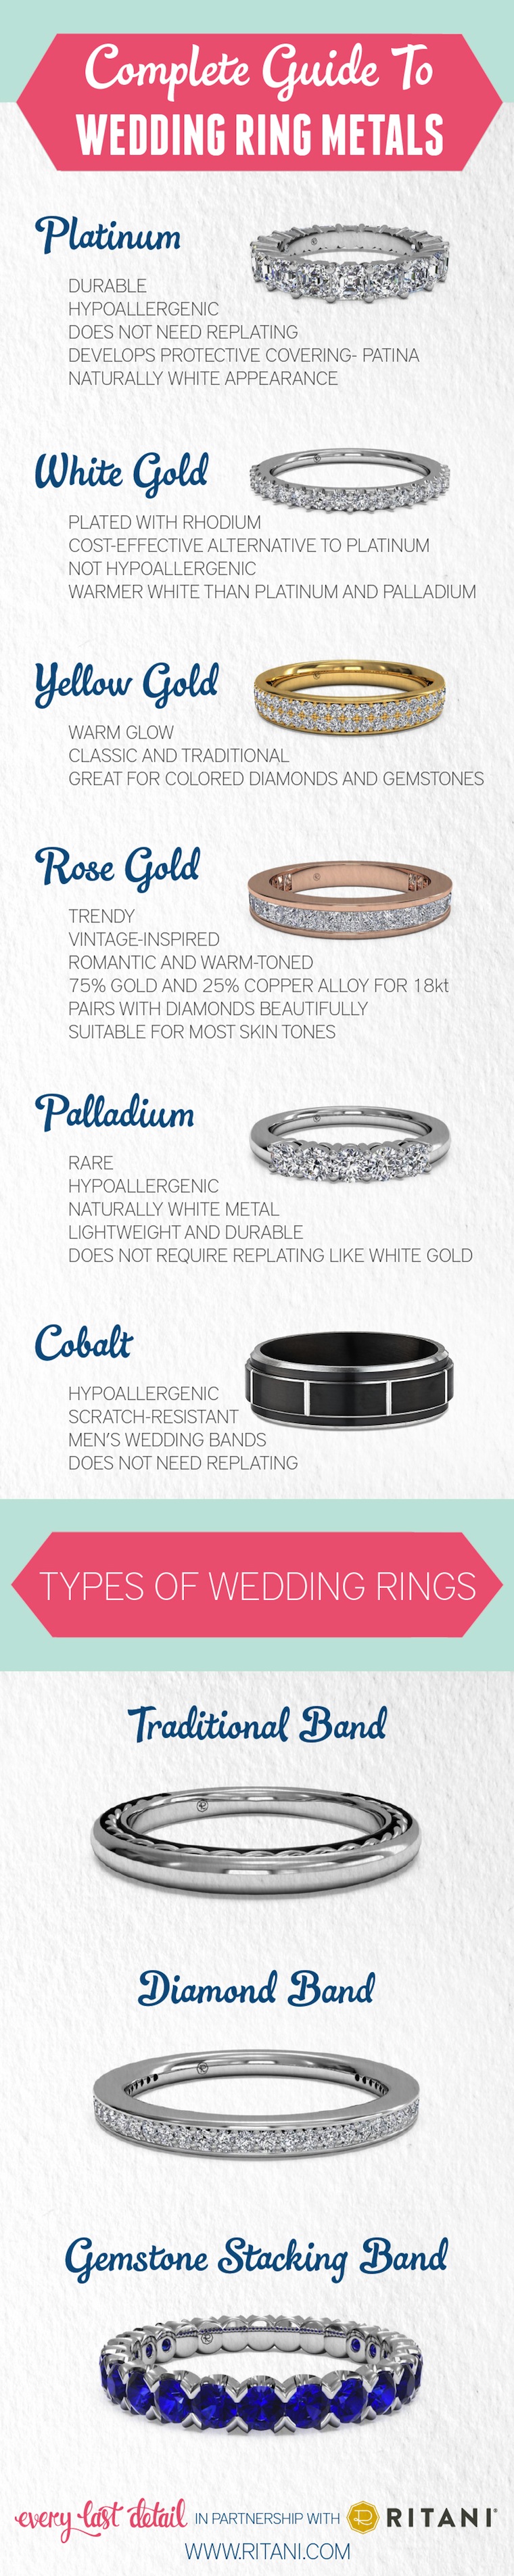 A Complete Guide to Wedding Ring Metals via TheELD.com